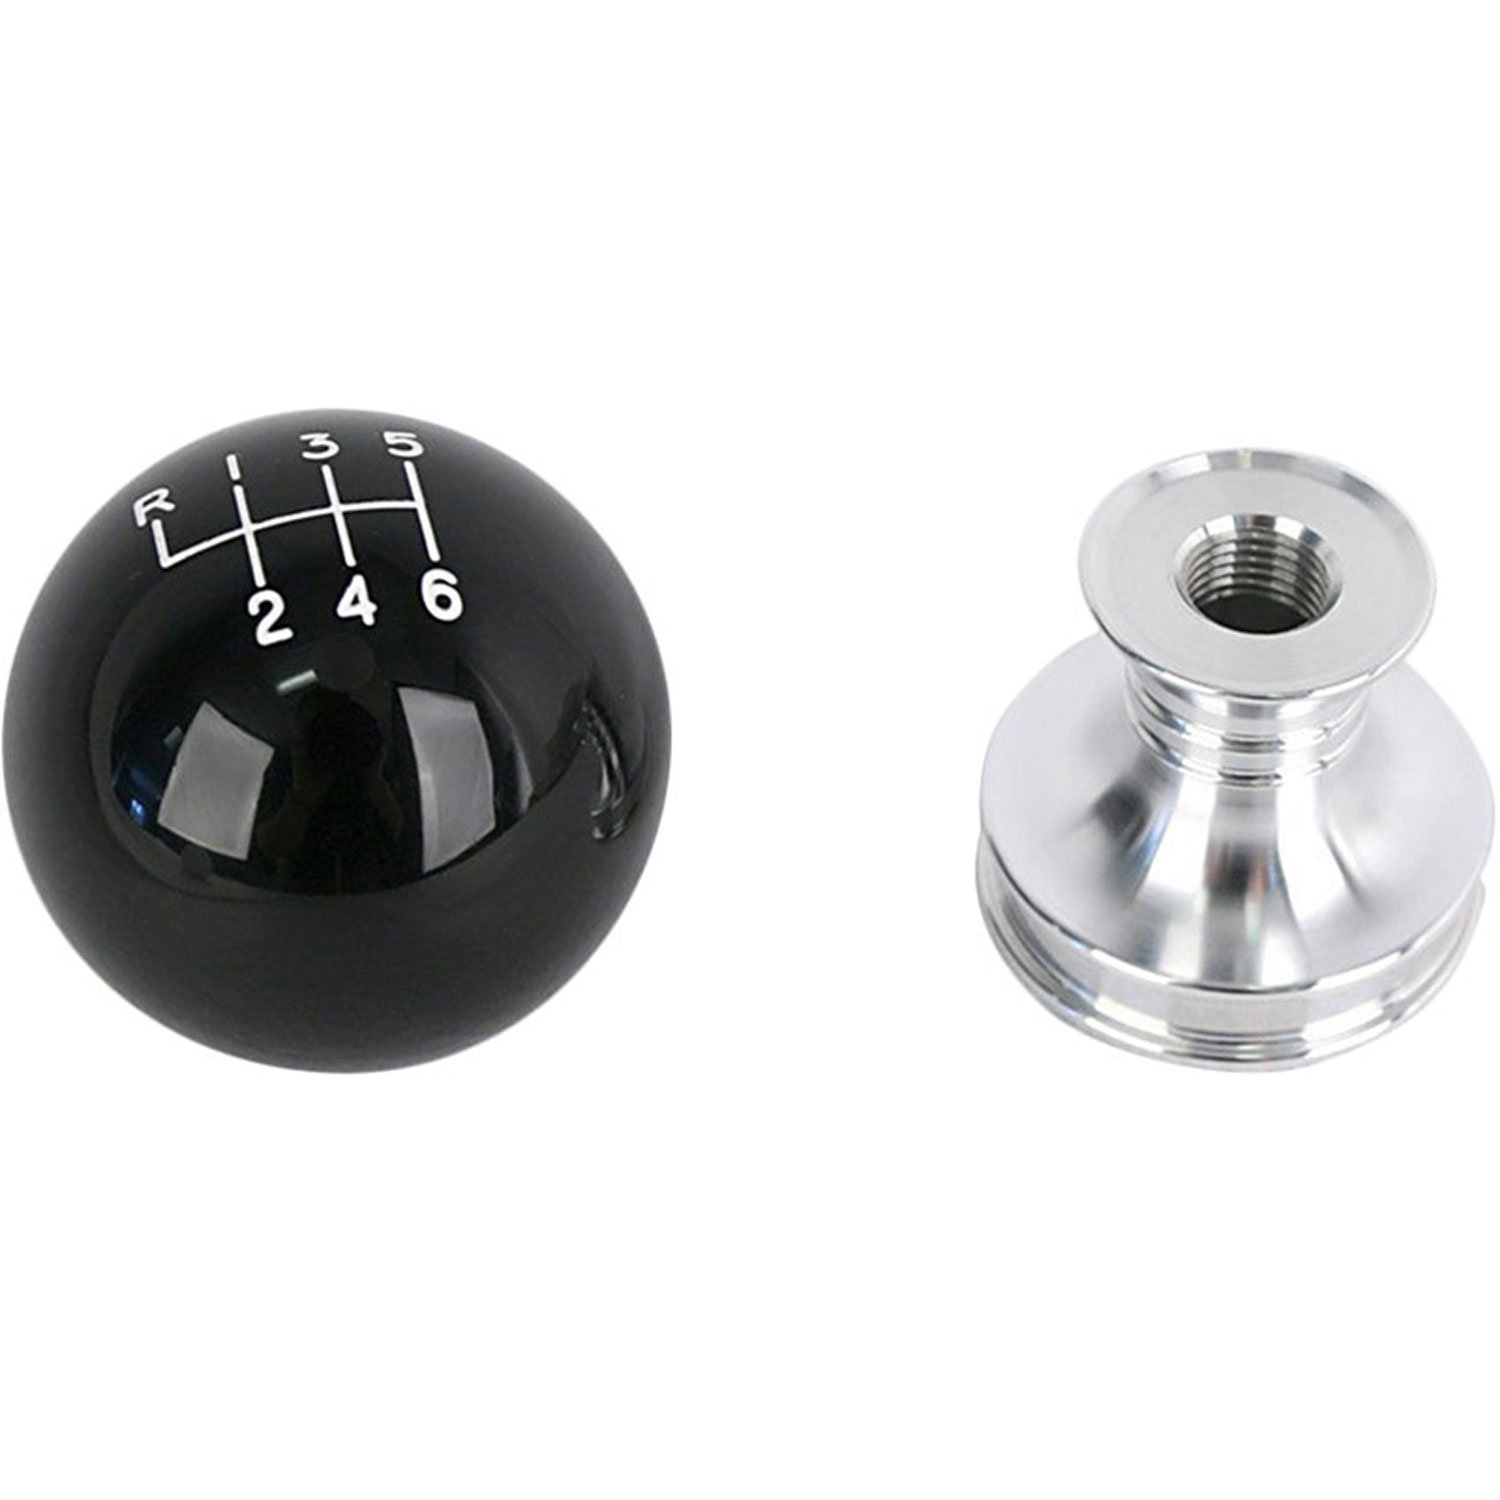 Black Engraved Shift knob and adapter for 2011+ Mustang